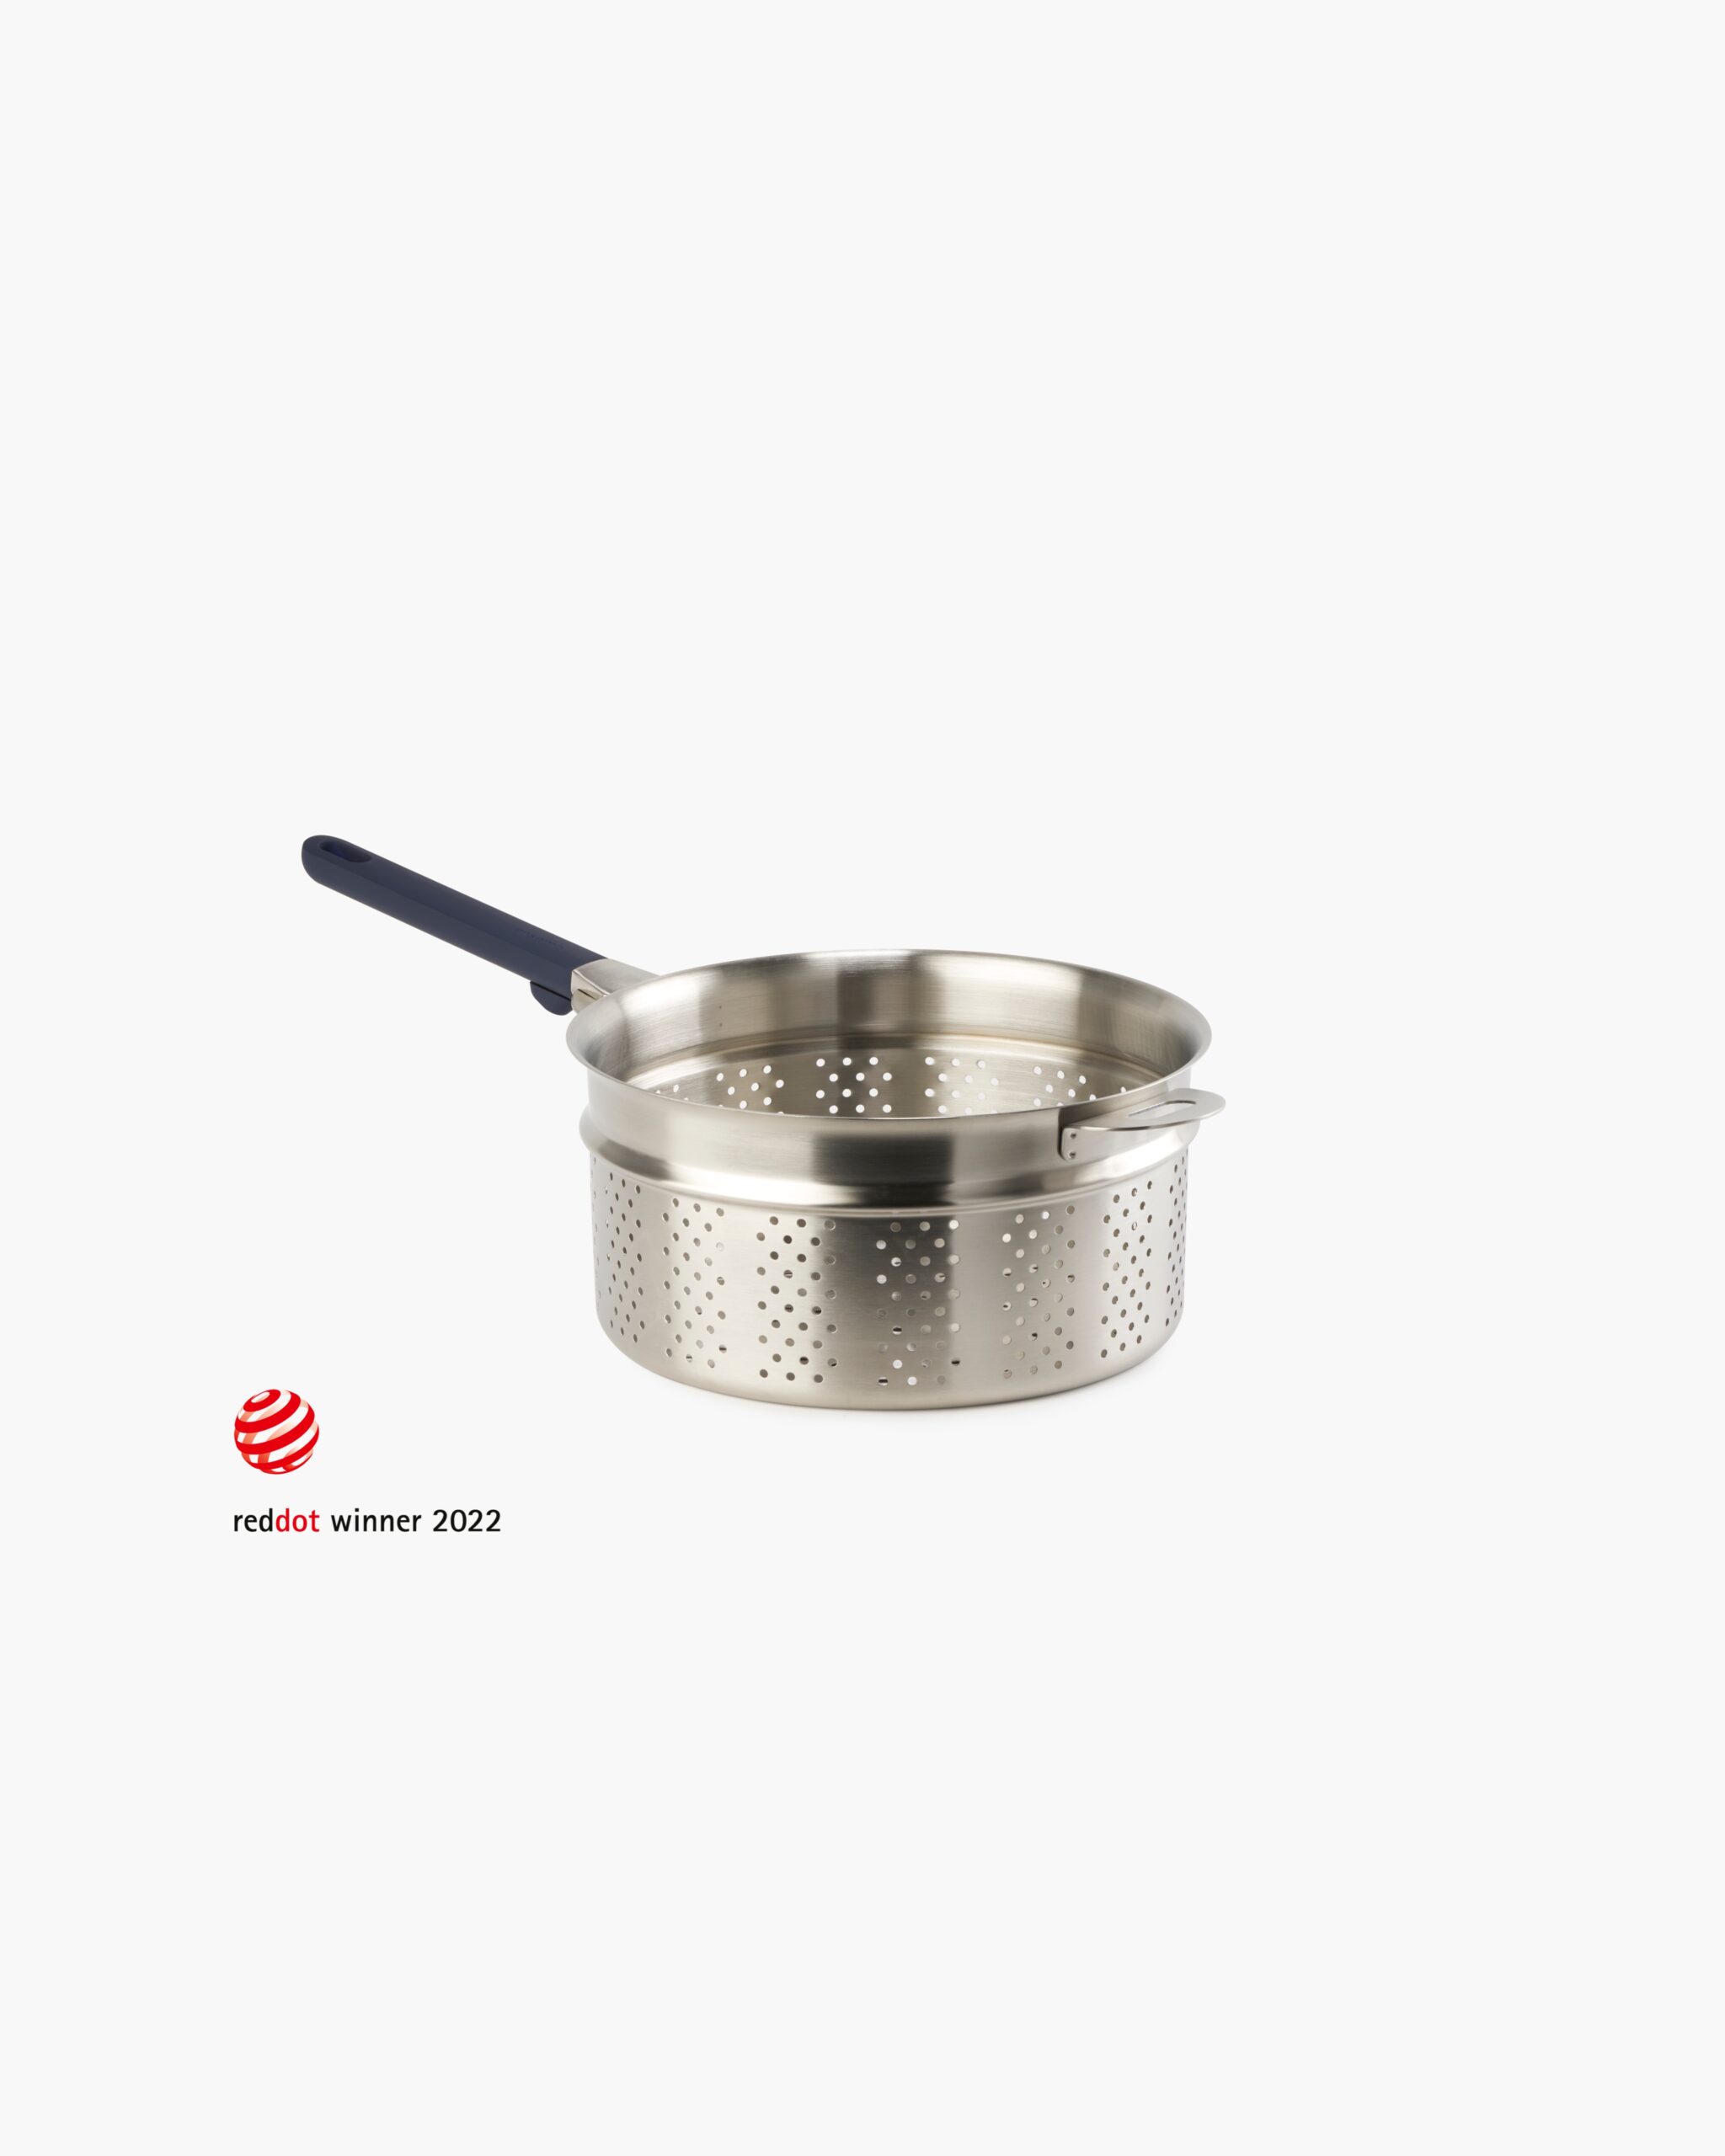 Shop ENSEMBL Stainless Steel Fully Clad Stacking Cookware with removable handles. 8 L Steamer Basket, Colander, Pasta Pot Insert. Multifunctional, long-lasting, design-forward home wares. Best all purpose steamer, colander, pasta-pot insert. Steamer with removable handles. Colander with removable handles.